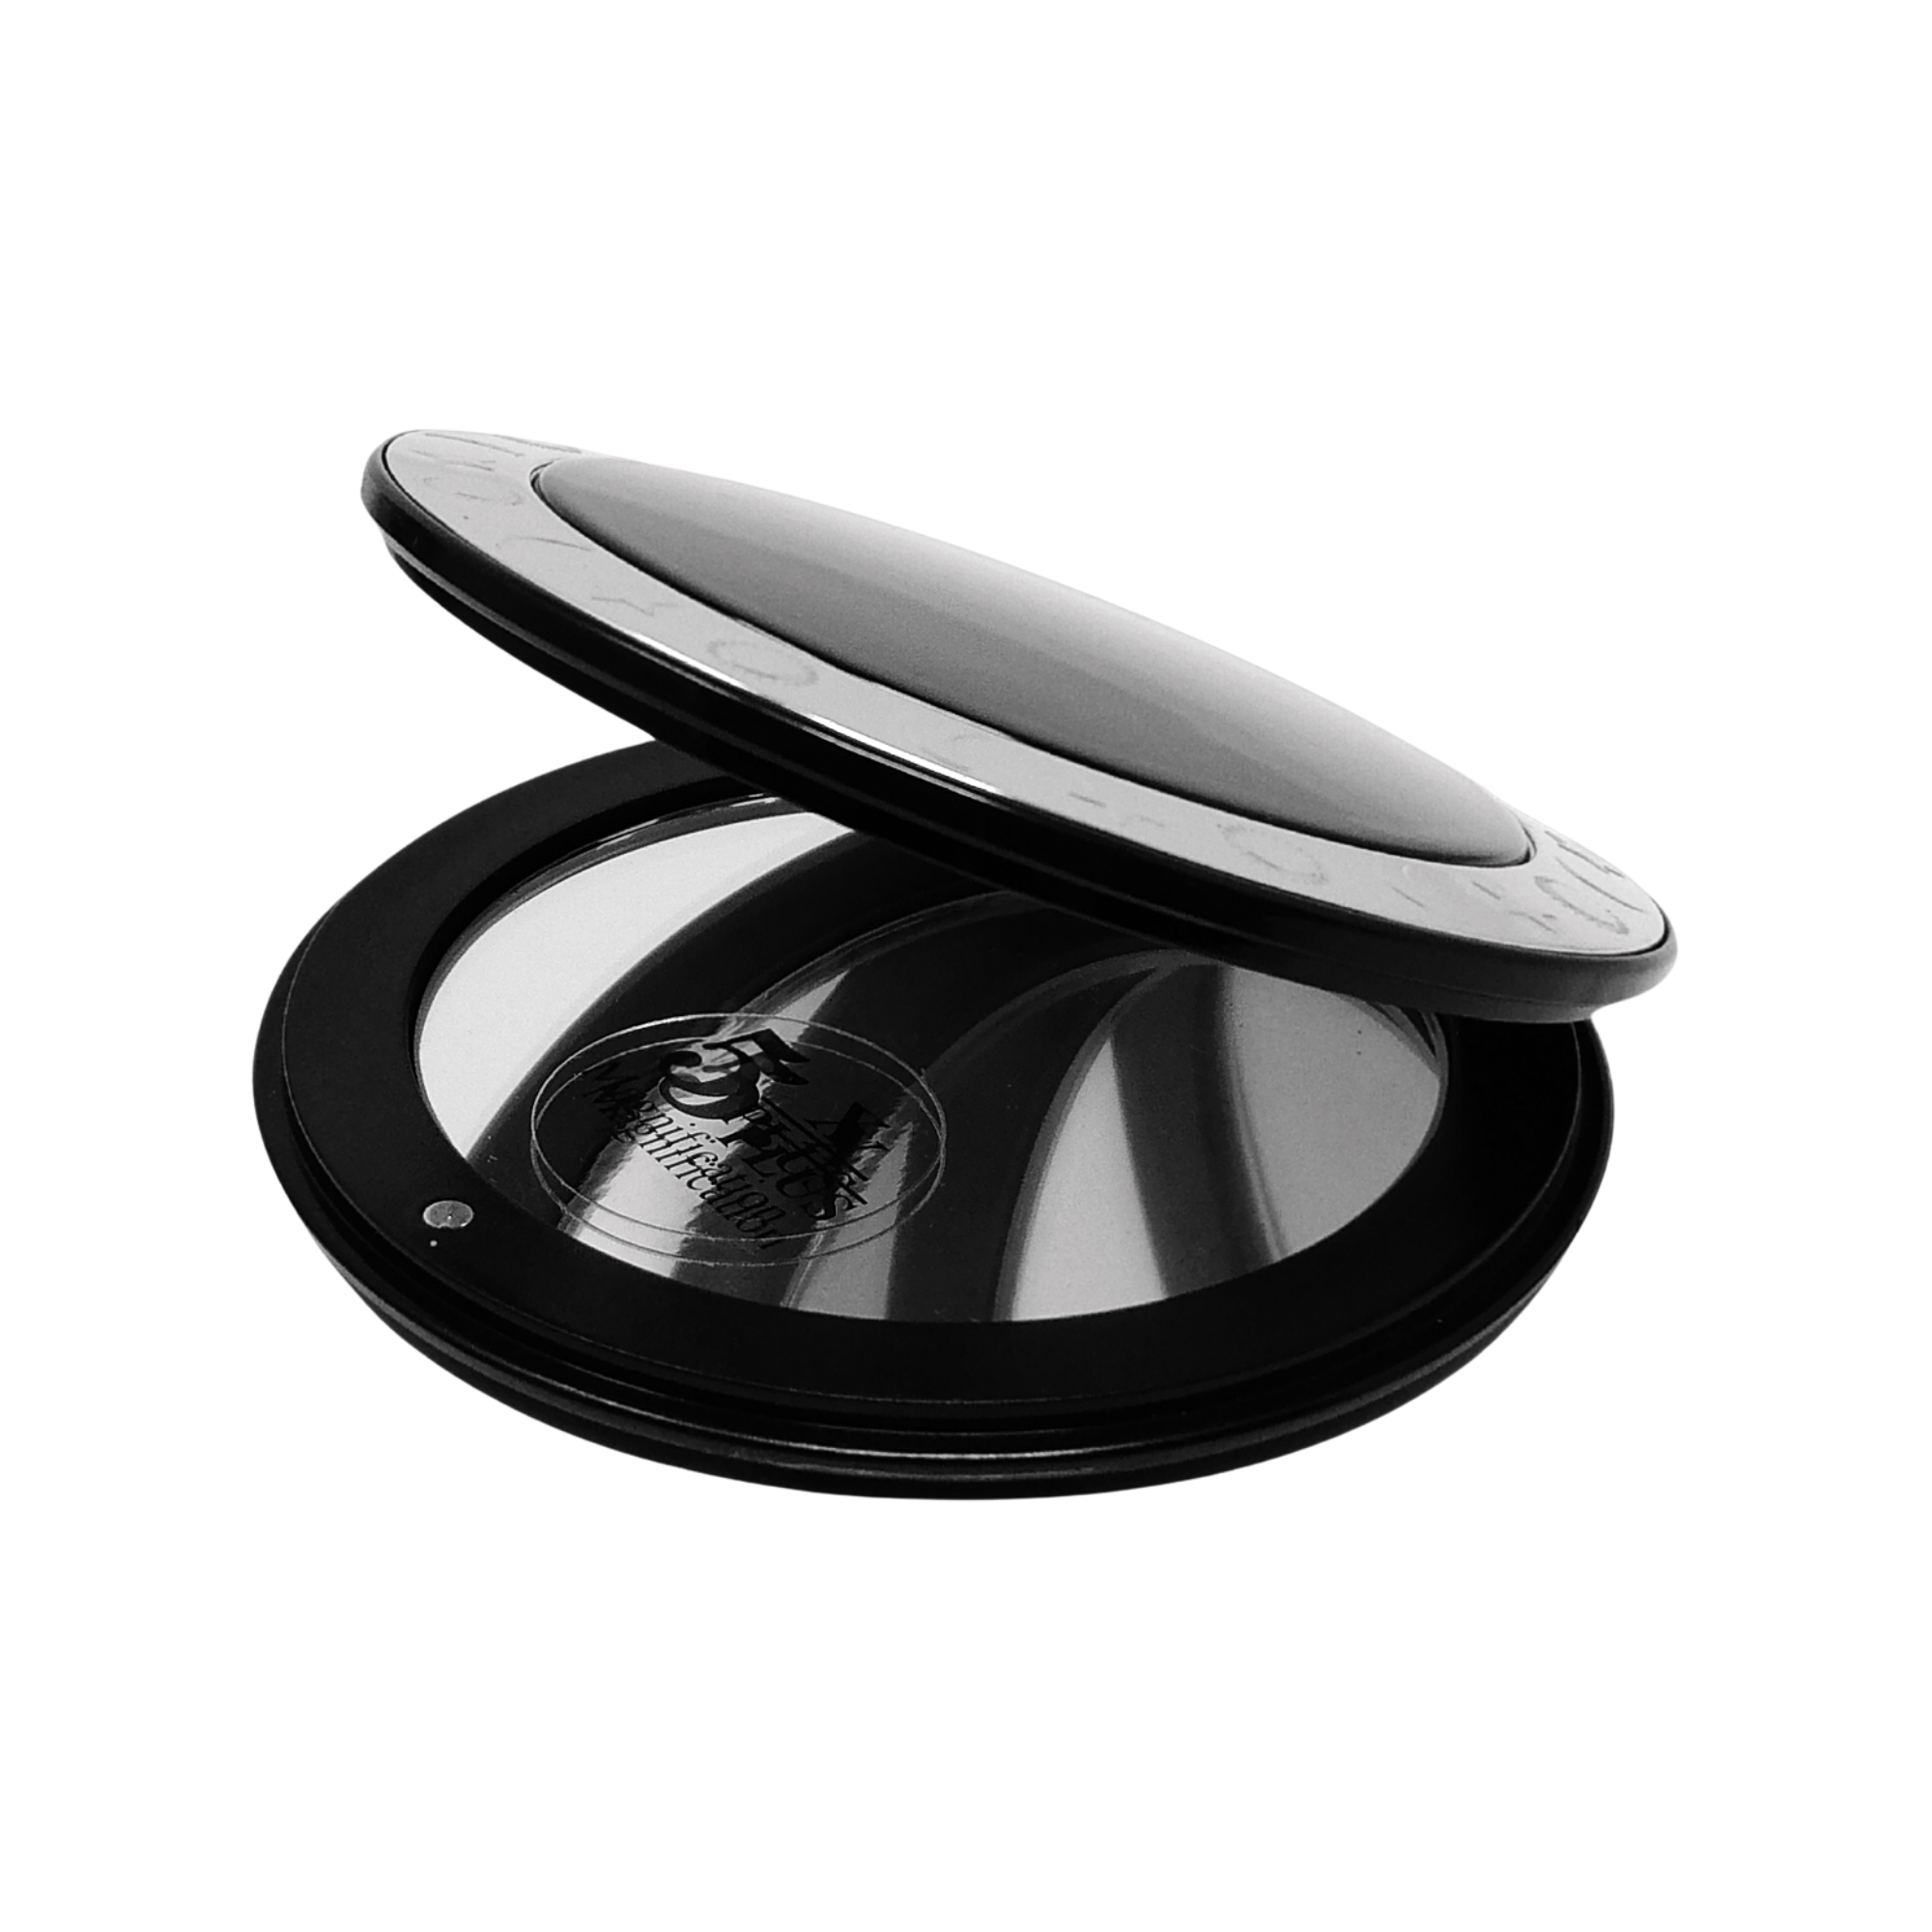 1X/5X Magnifying Double-Sided Gold/Silver Round Compact Mirror (CM507)